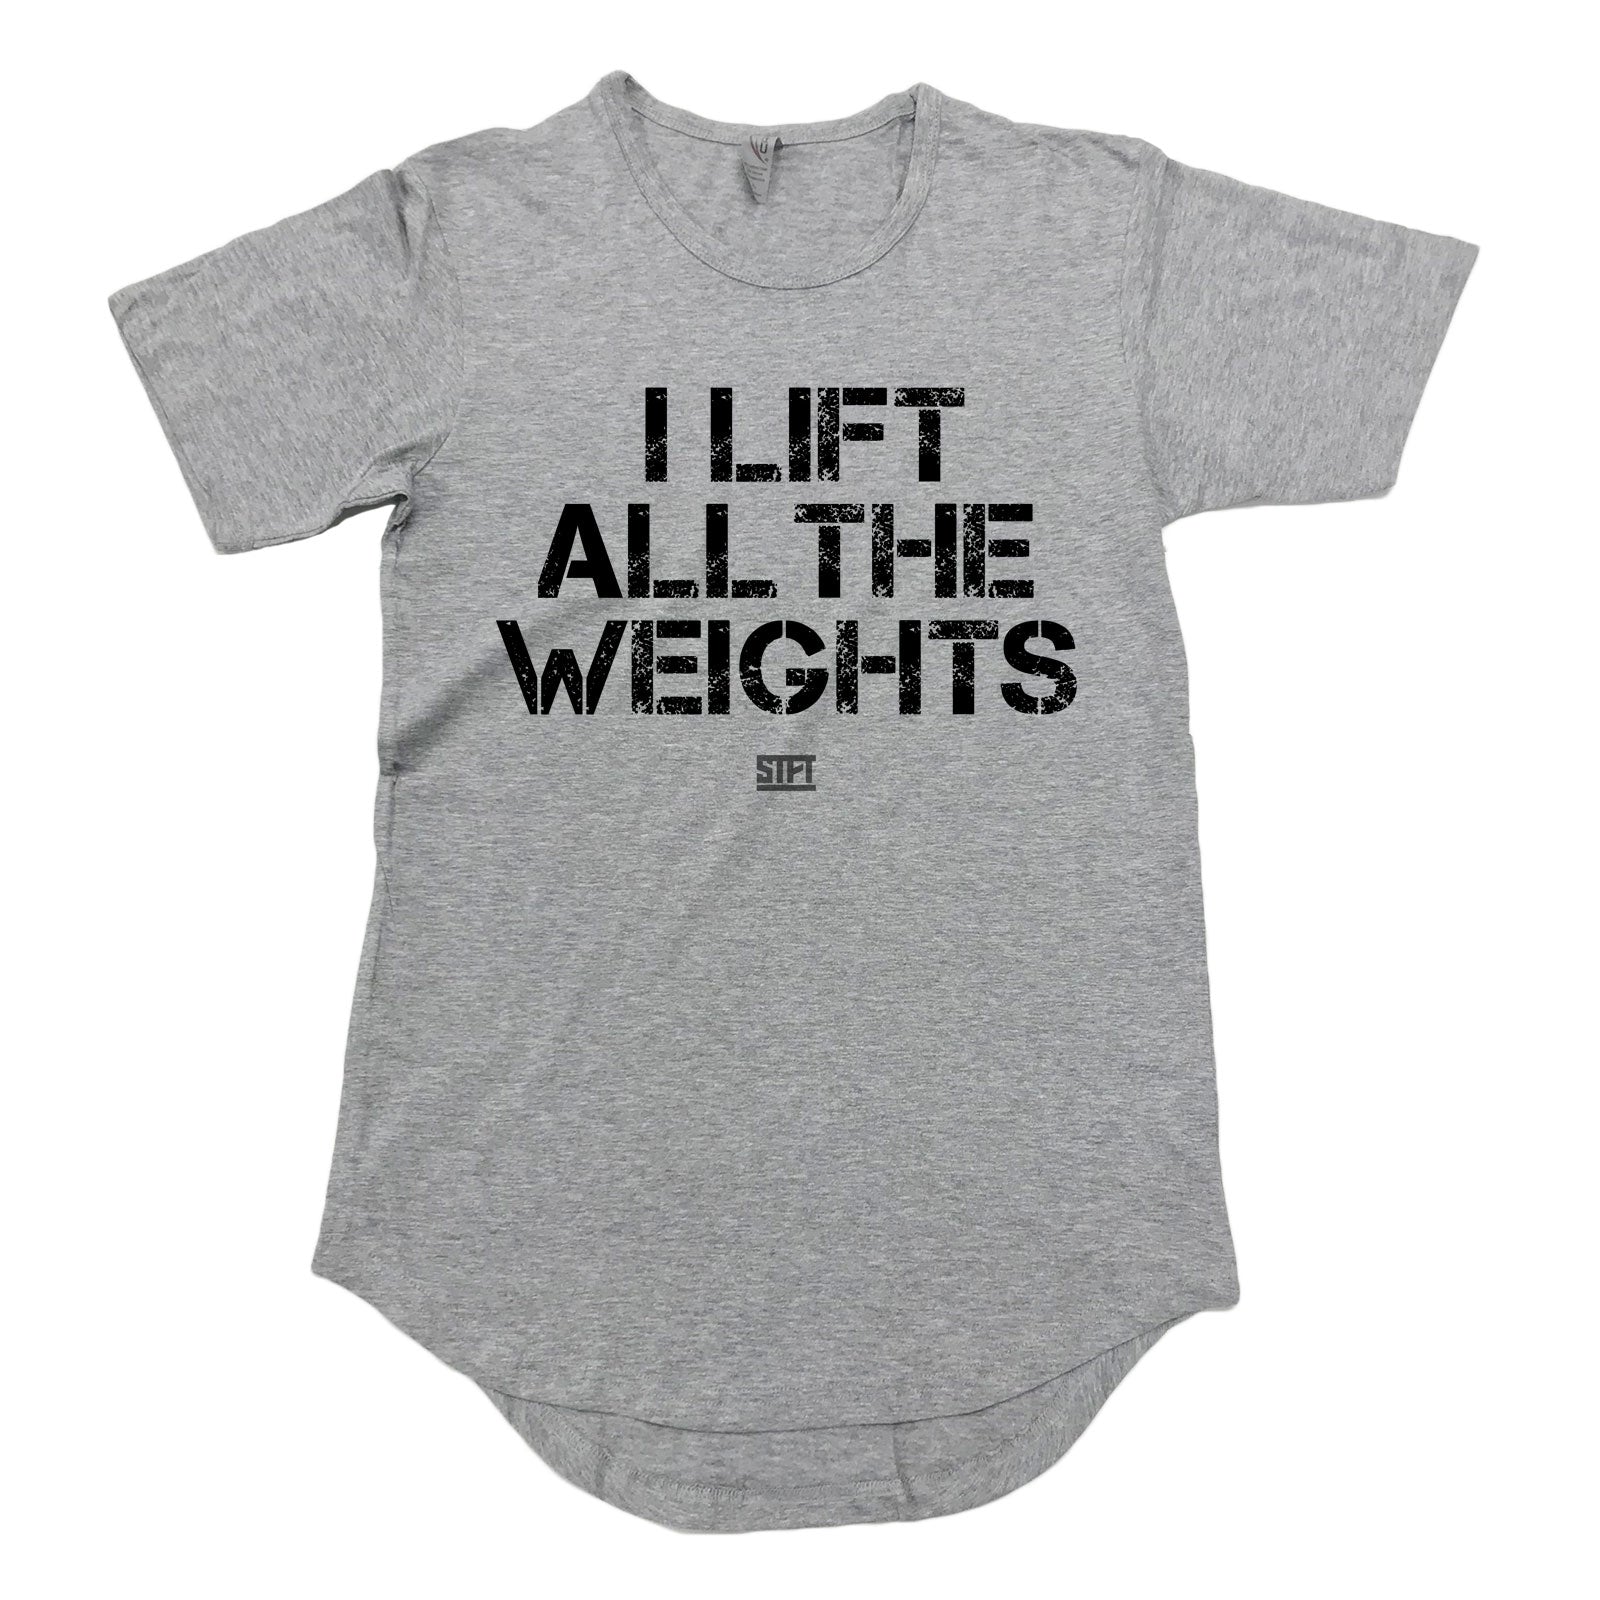 STFT - All The Weights Scoop Tee 